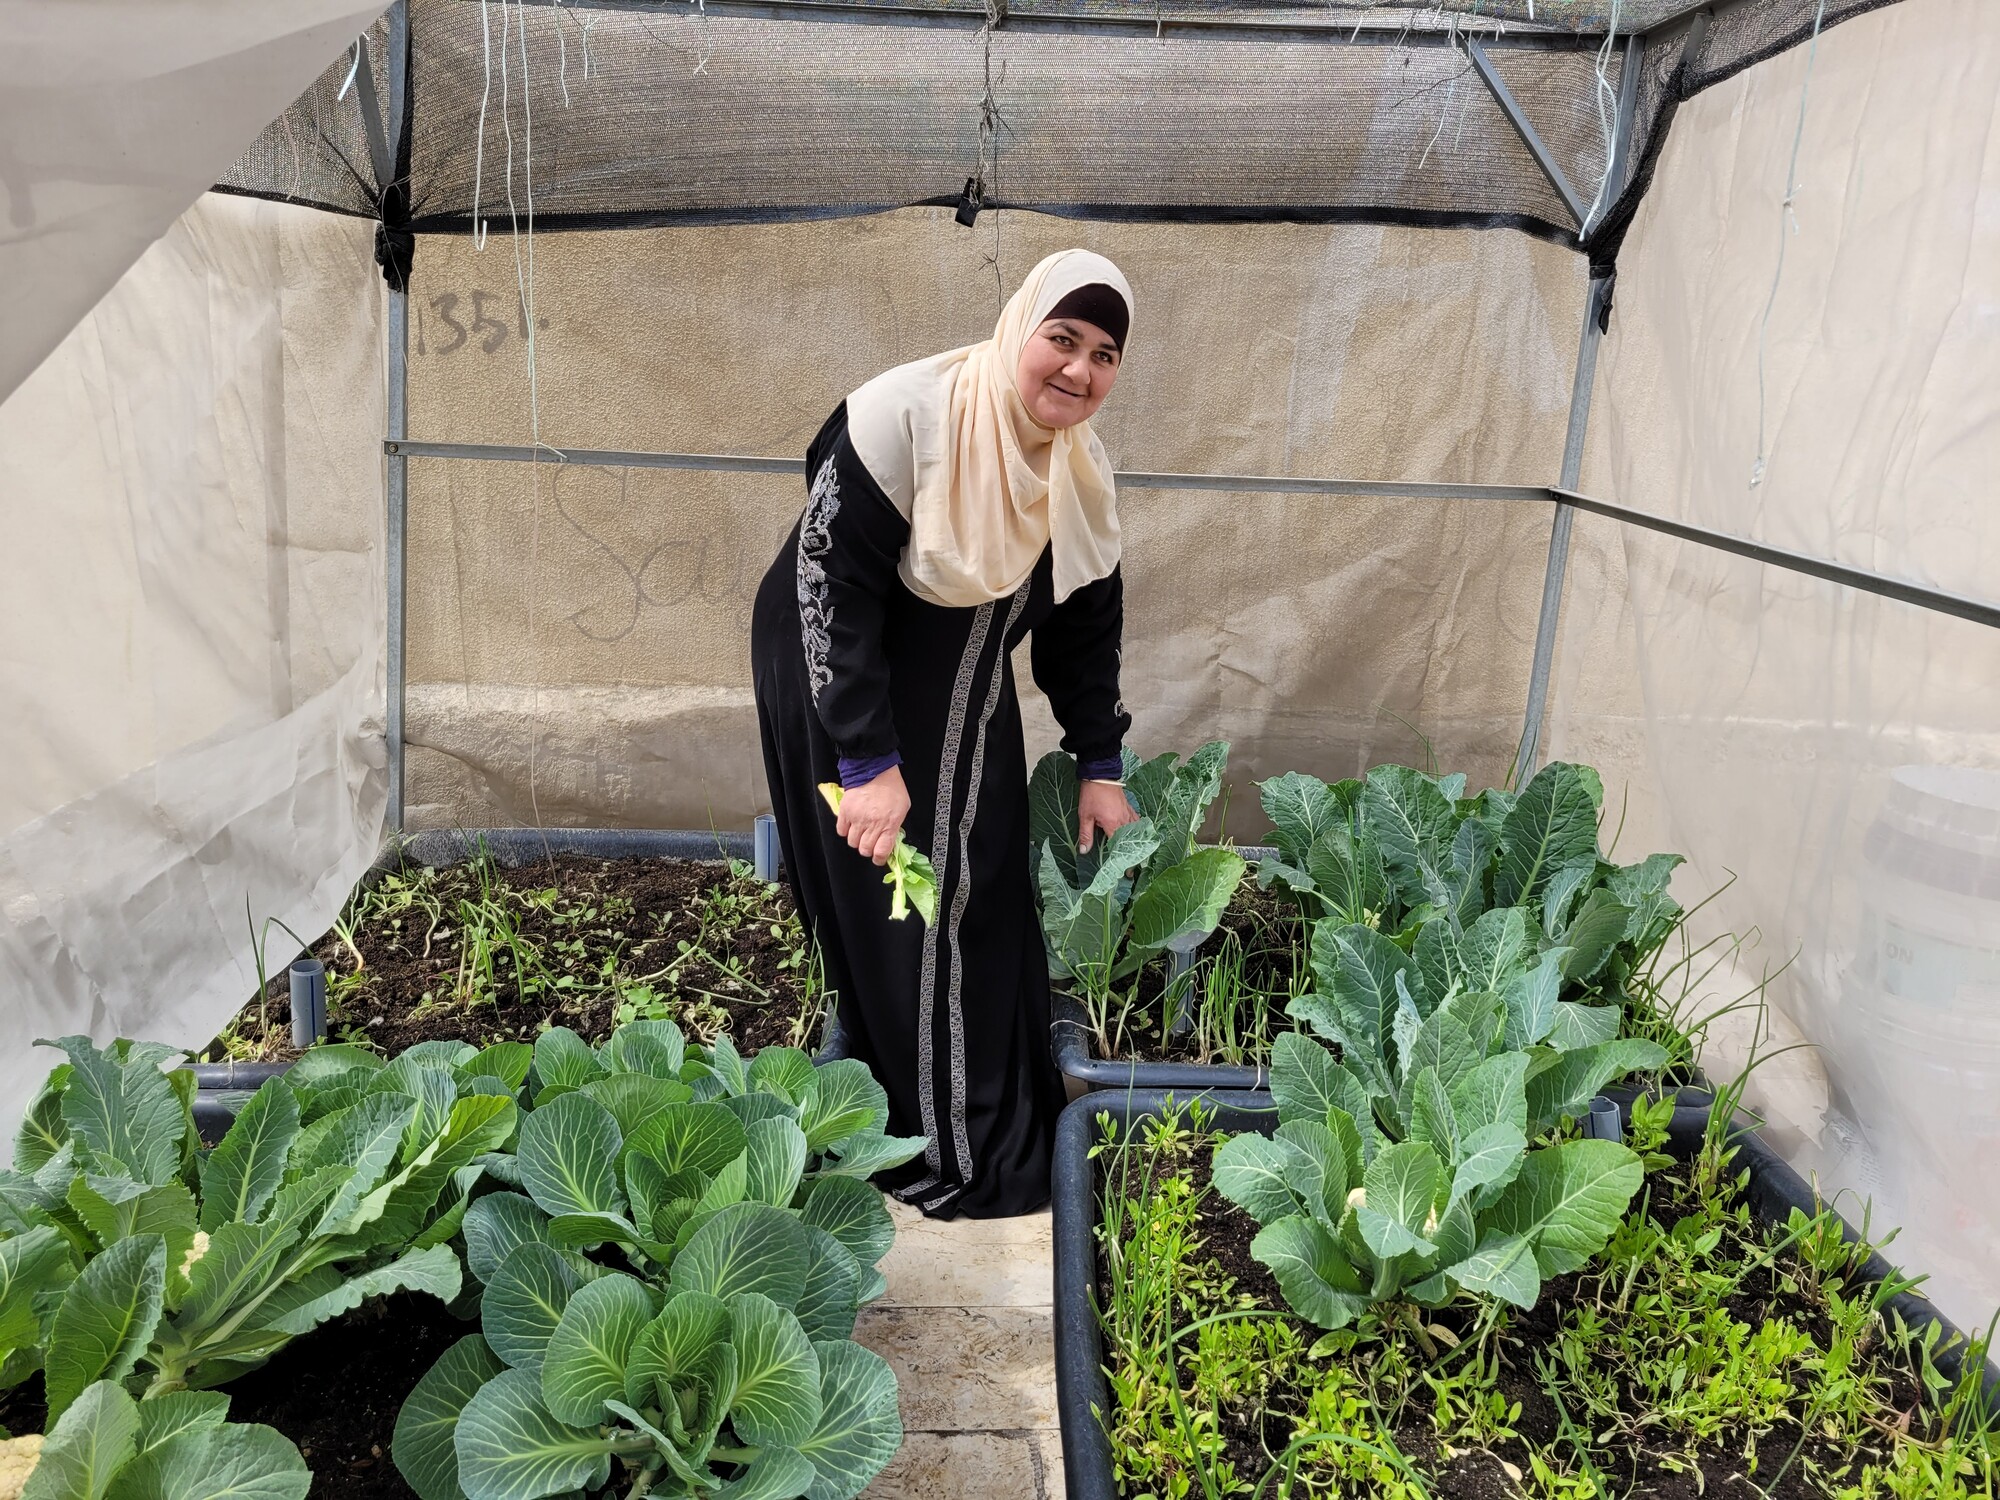 A woman leans over her vegetables in a greenhouse